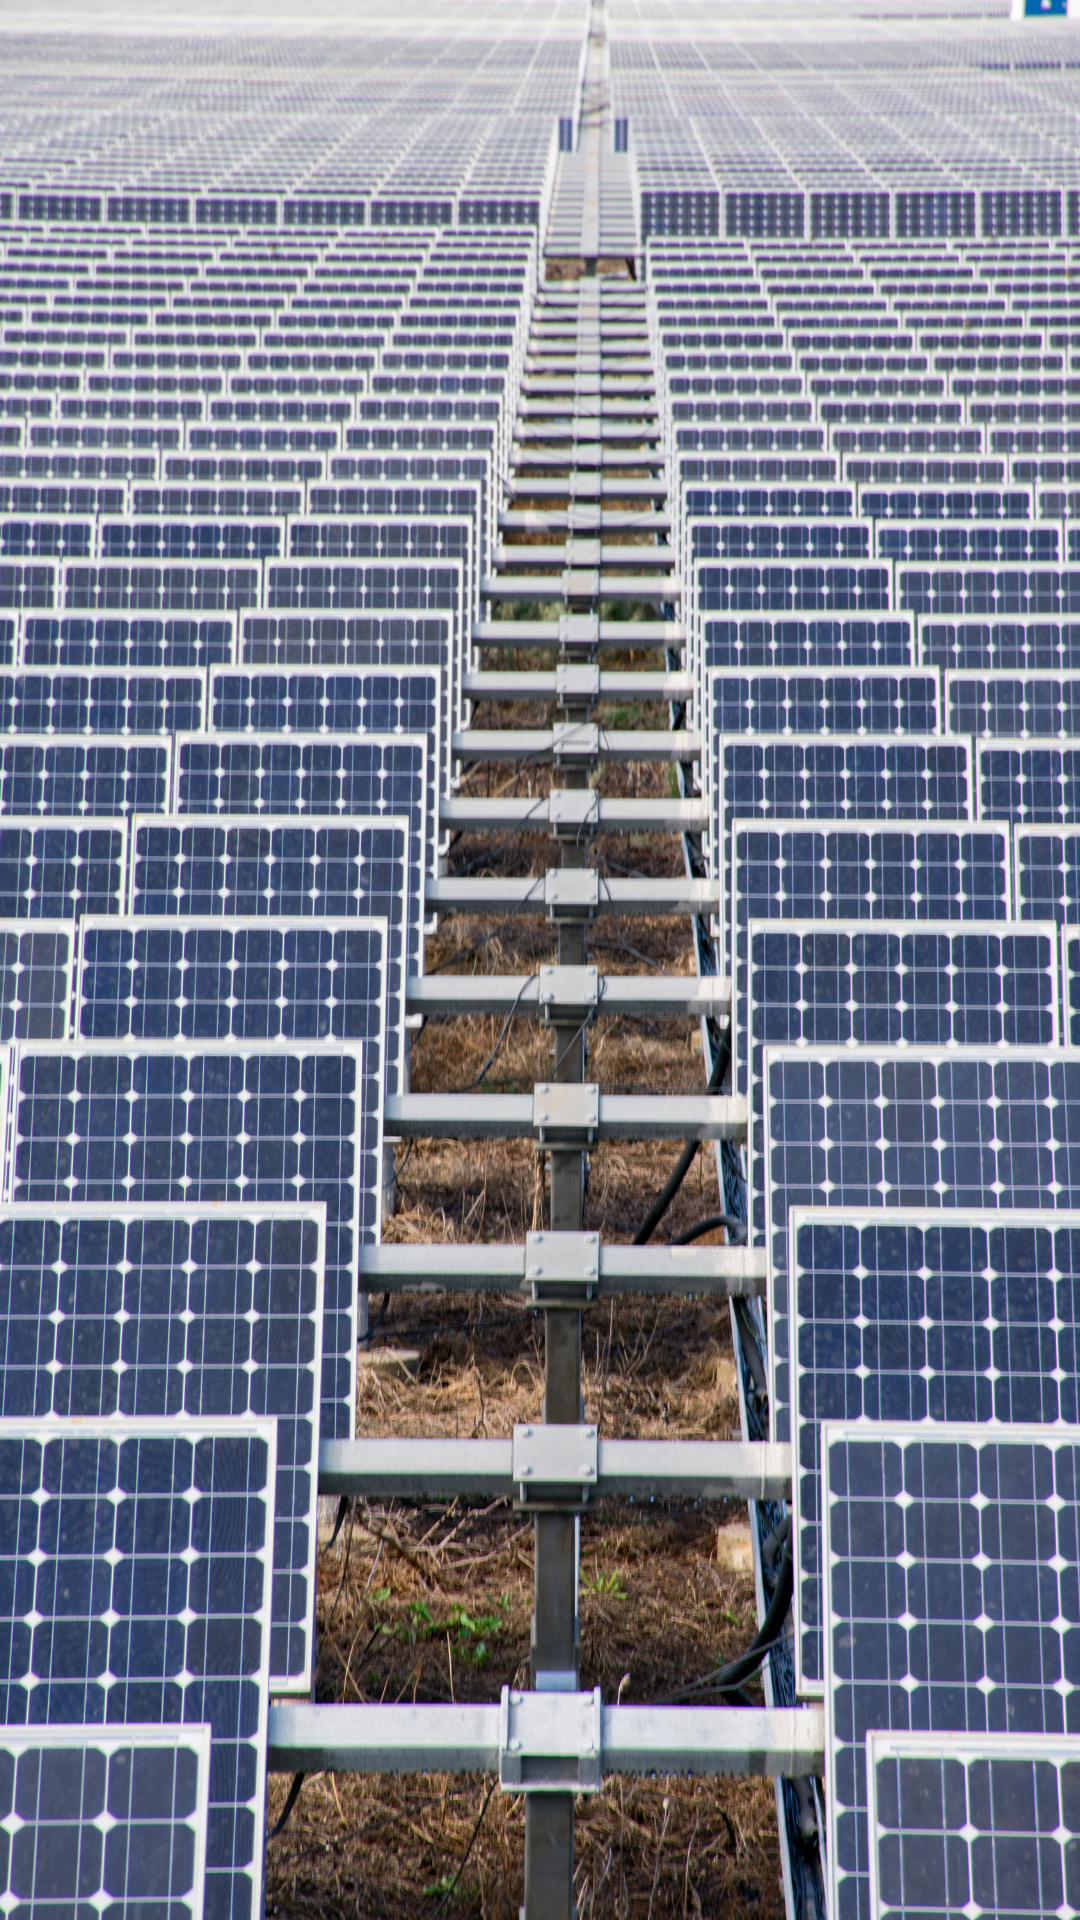 IOSH Construction and Operations Safety for Solar Power